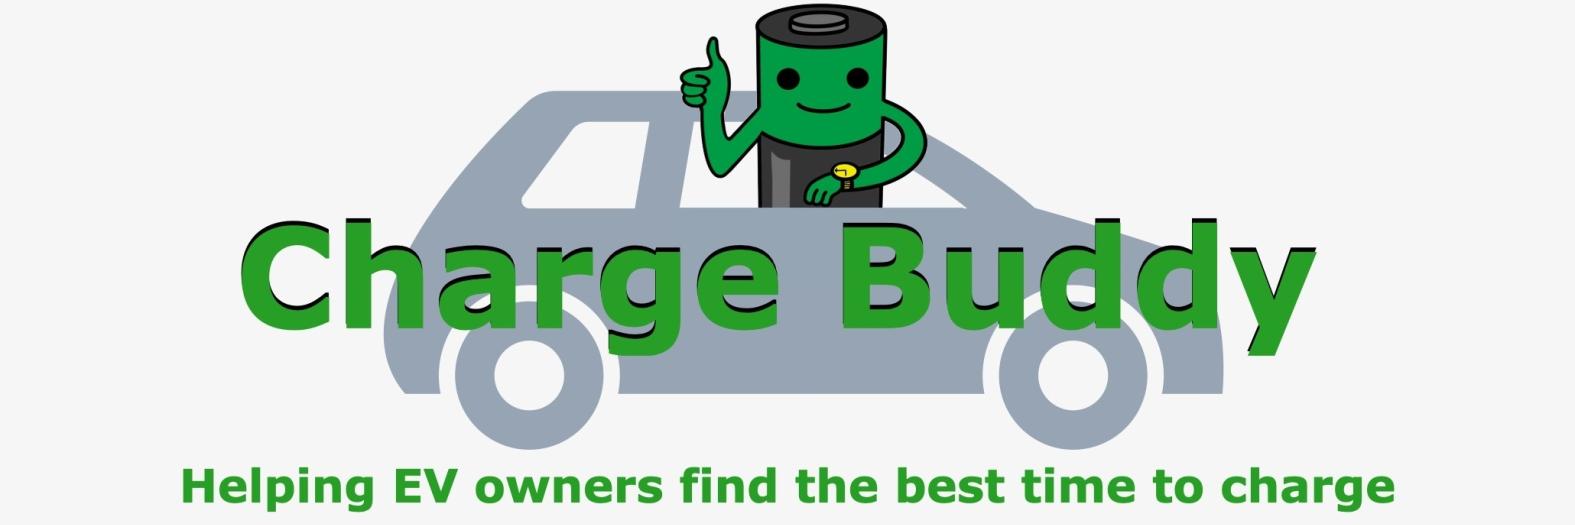 Charge Buddy - we help EV owners find when to charge